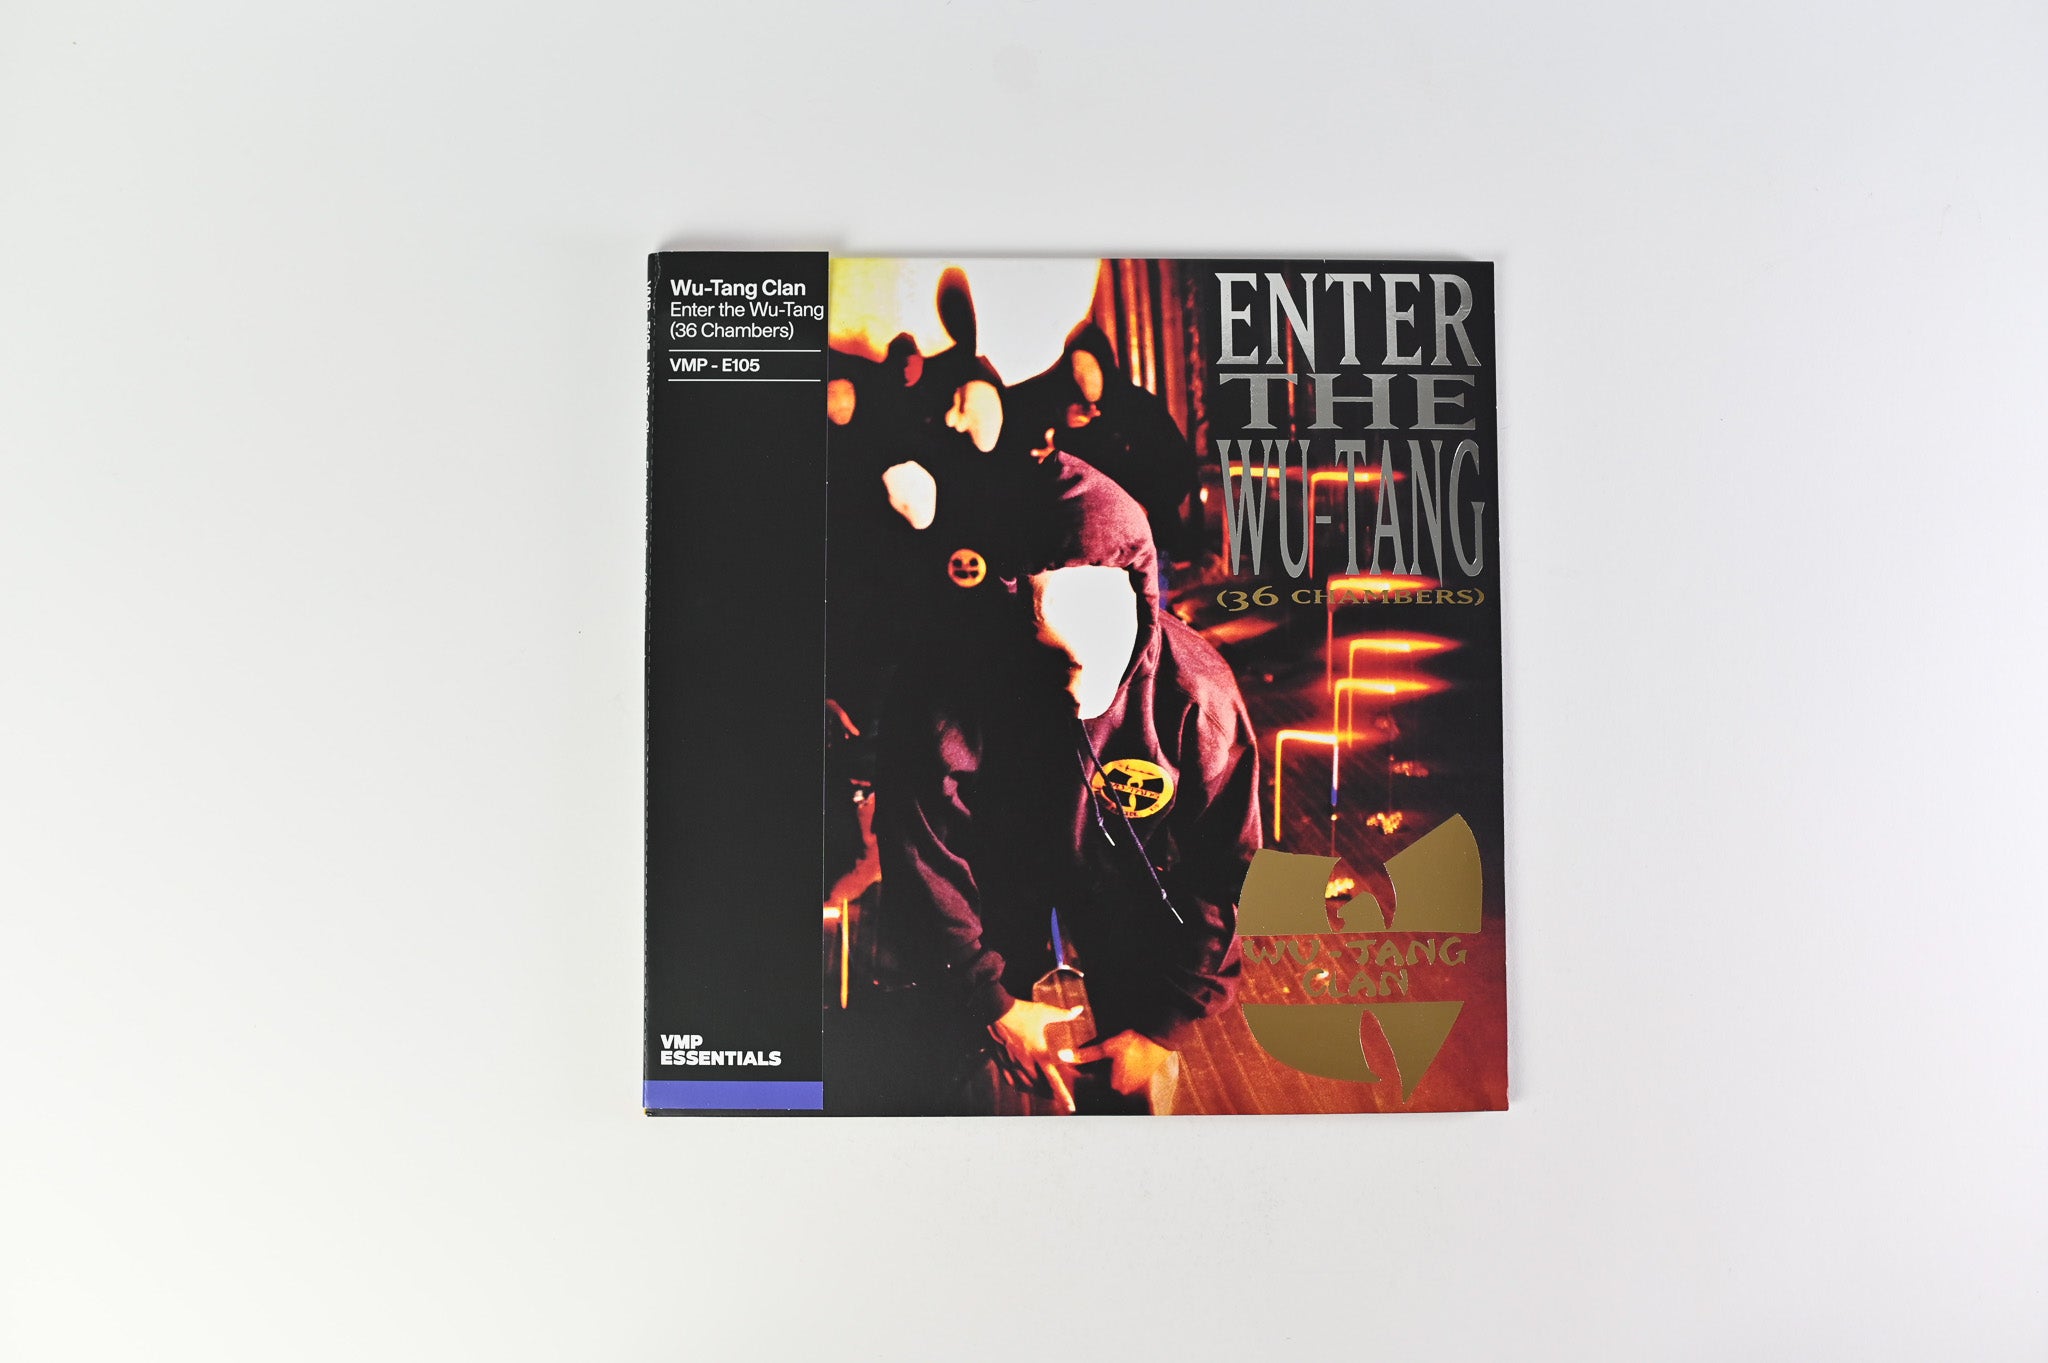 Wu-Tang Clan - Enter The Wu-Tang (36 Chambers) Vinyl Me Please Gold Galaxy Reissue